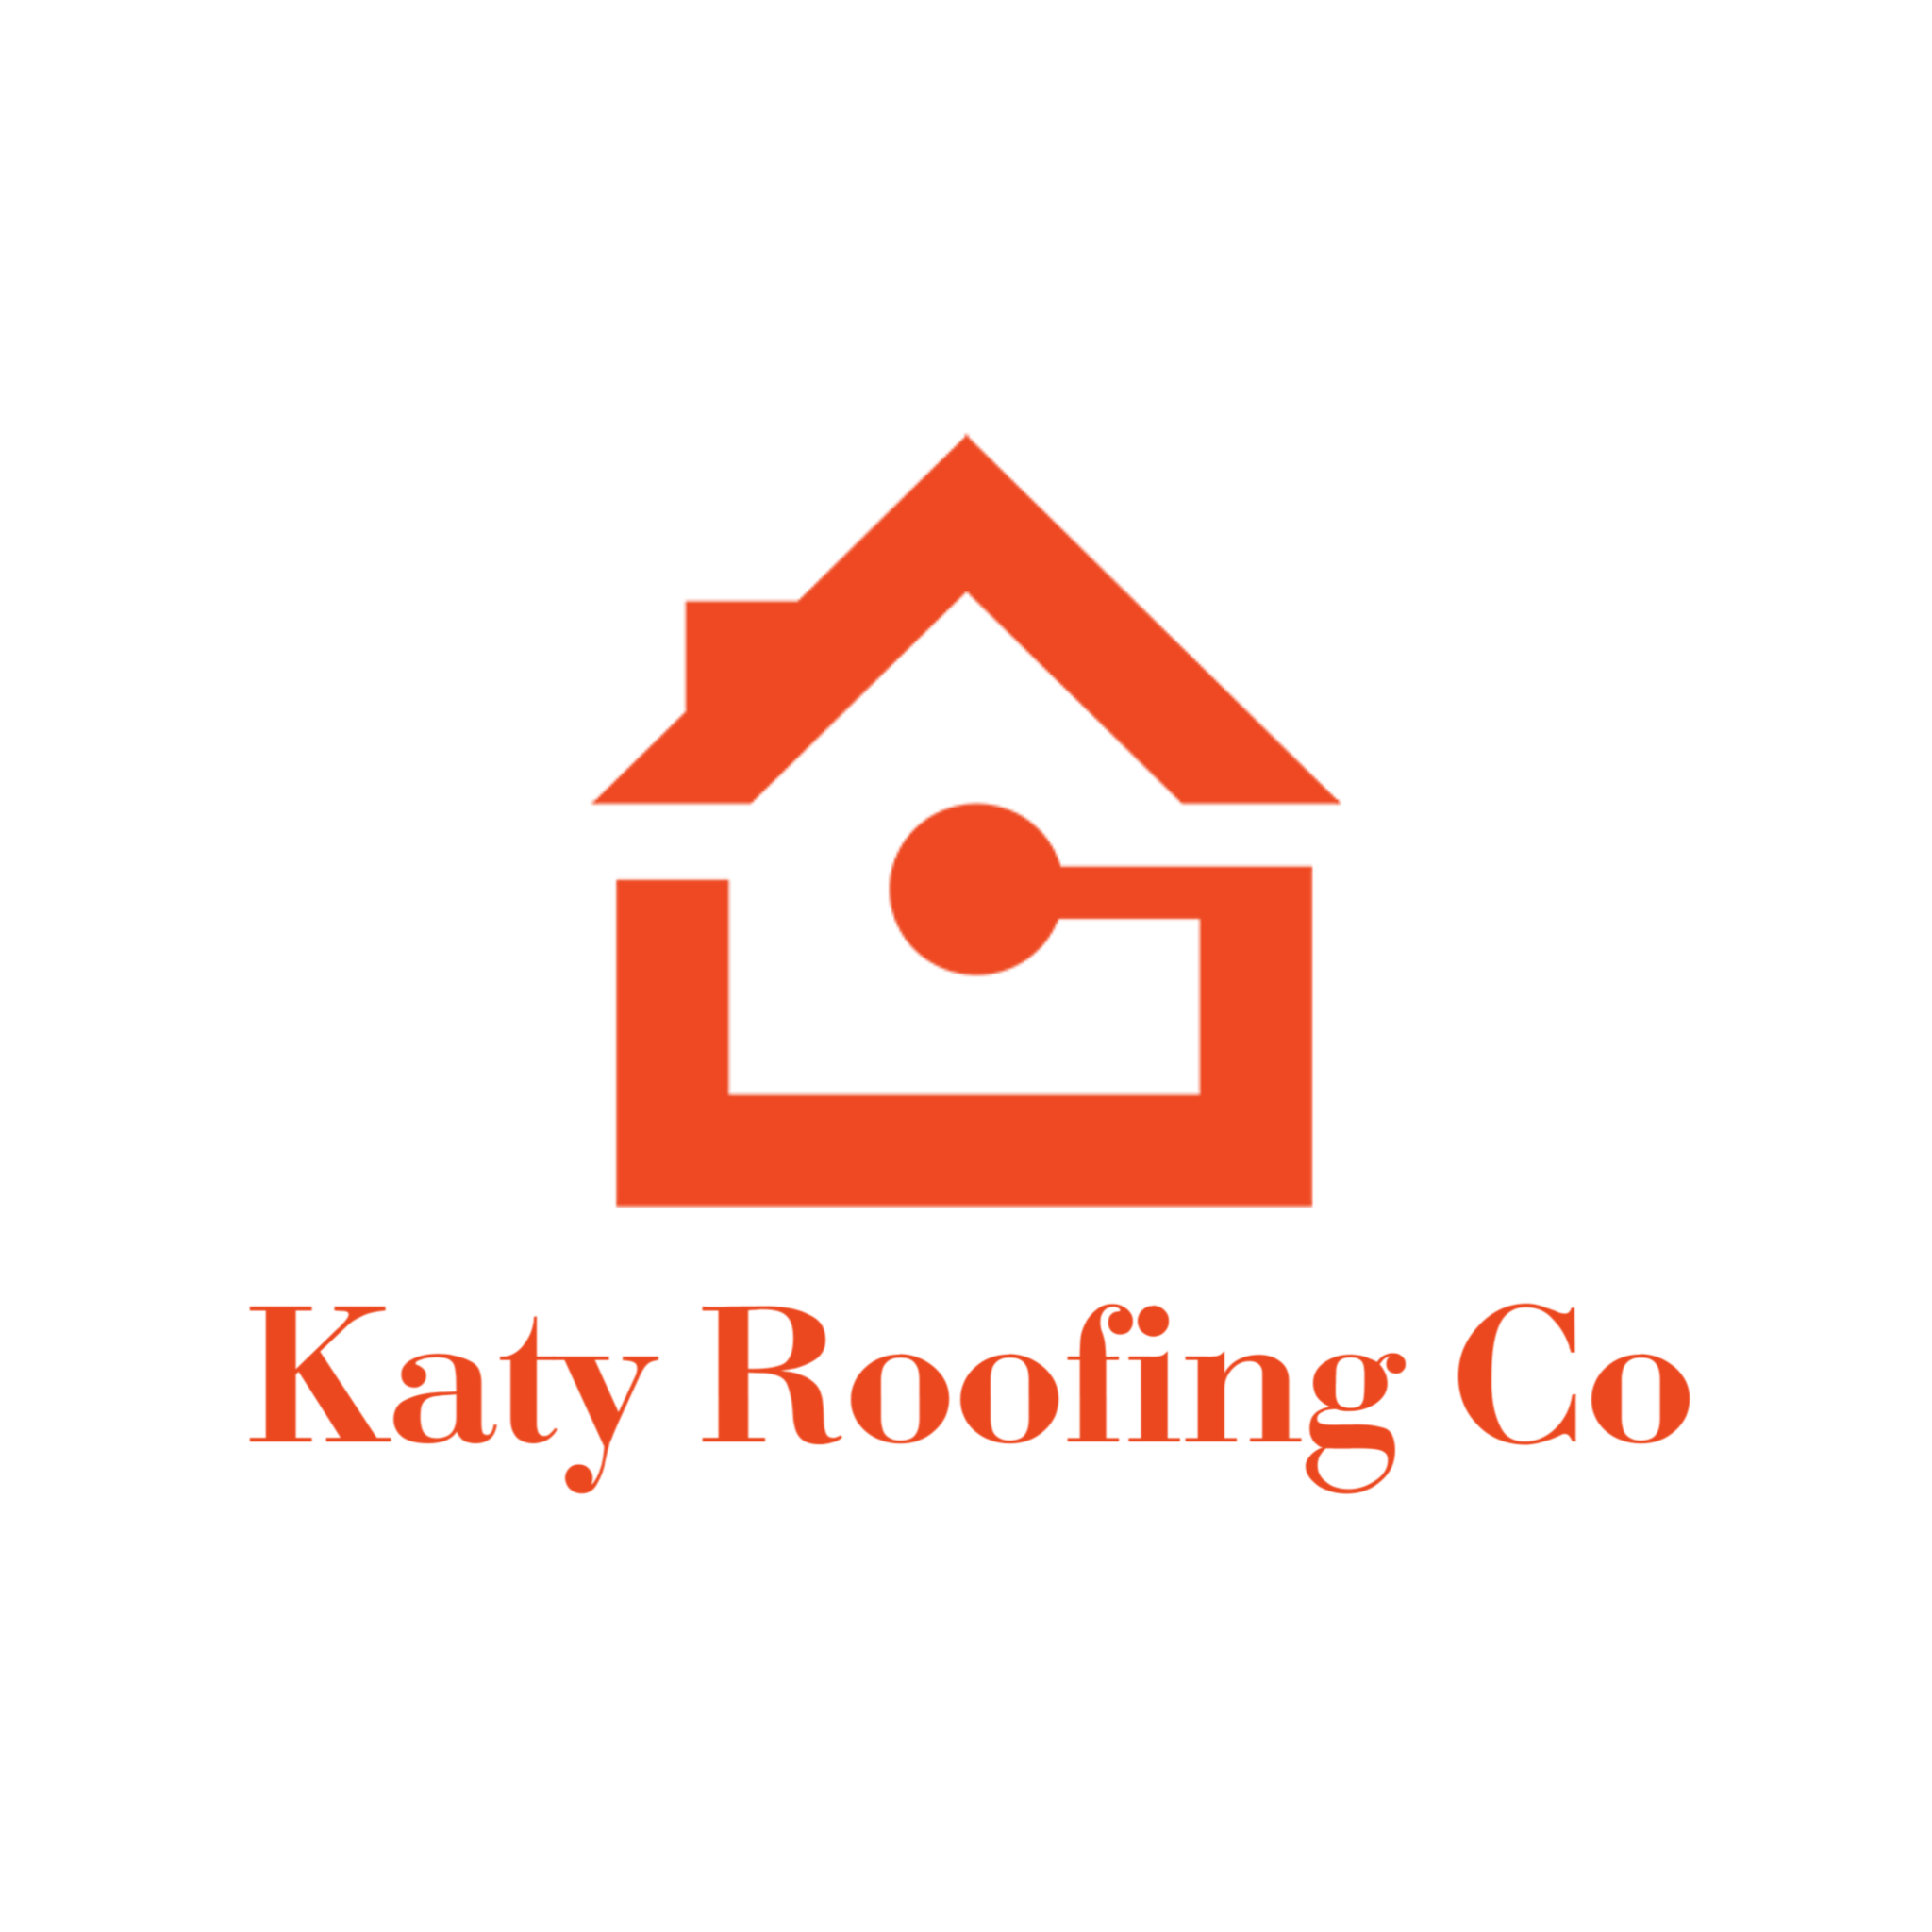 Katy Roofing Co